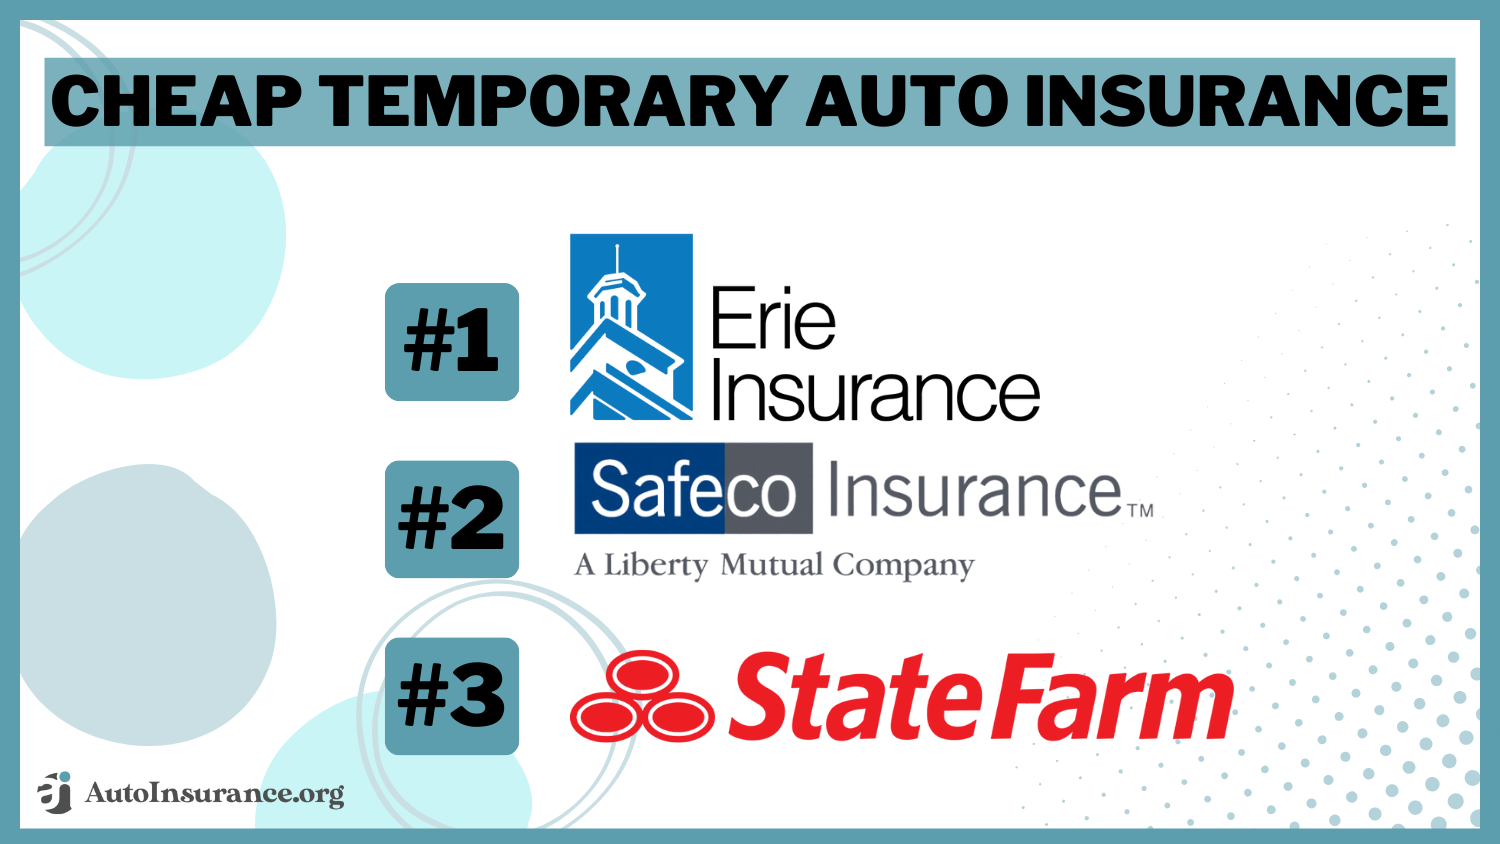 Erie, Safeco, and State Farm cheap temporary auto insurance